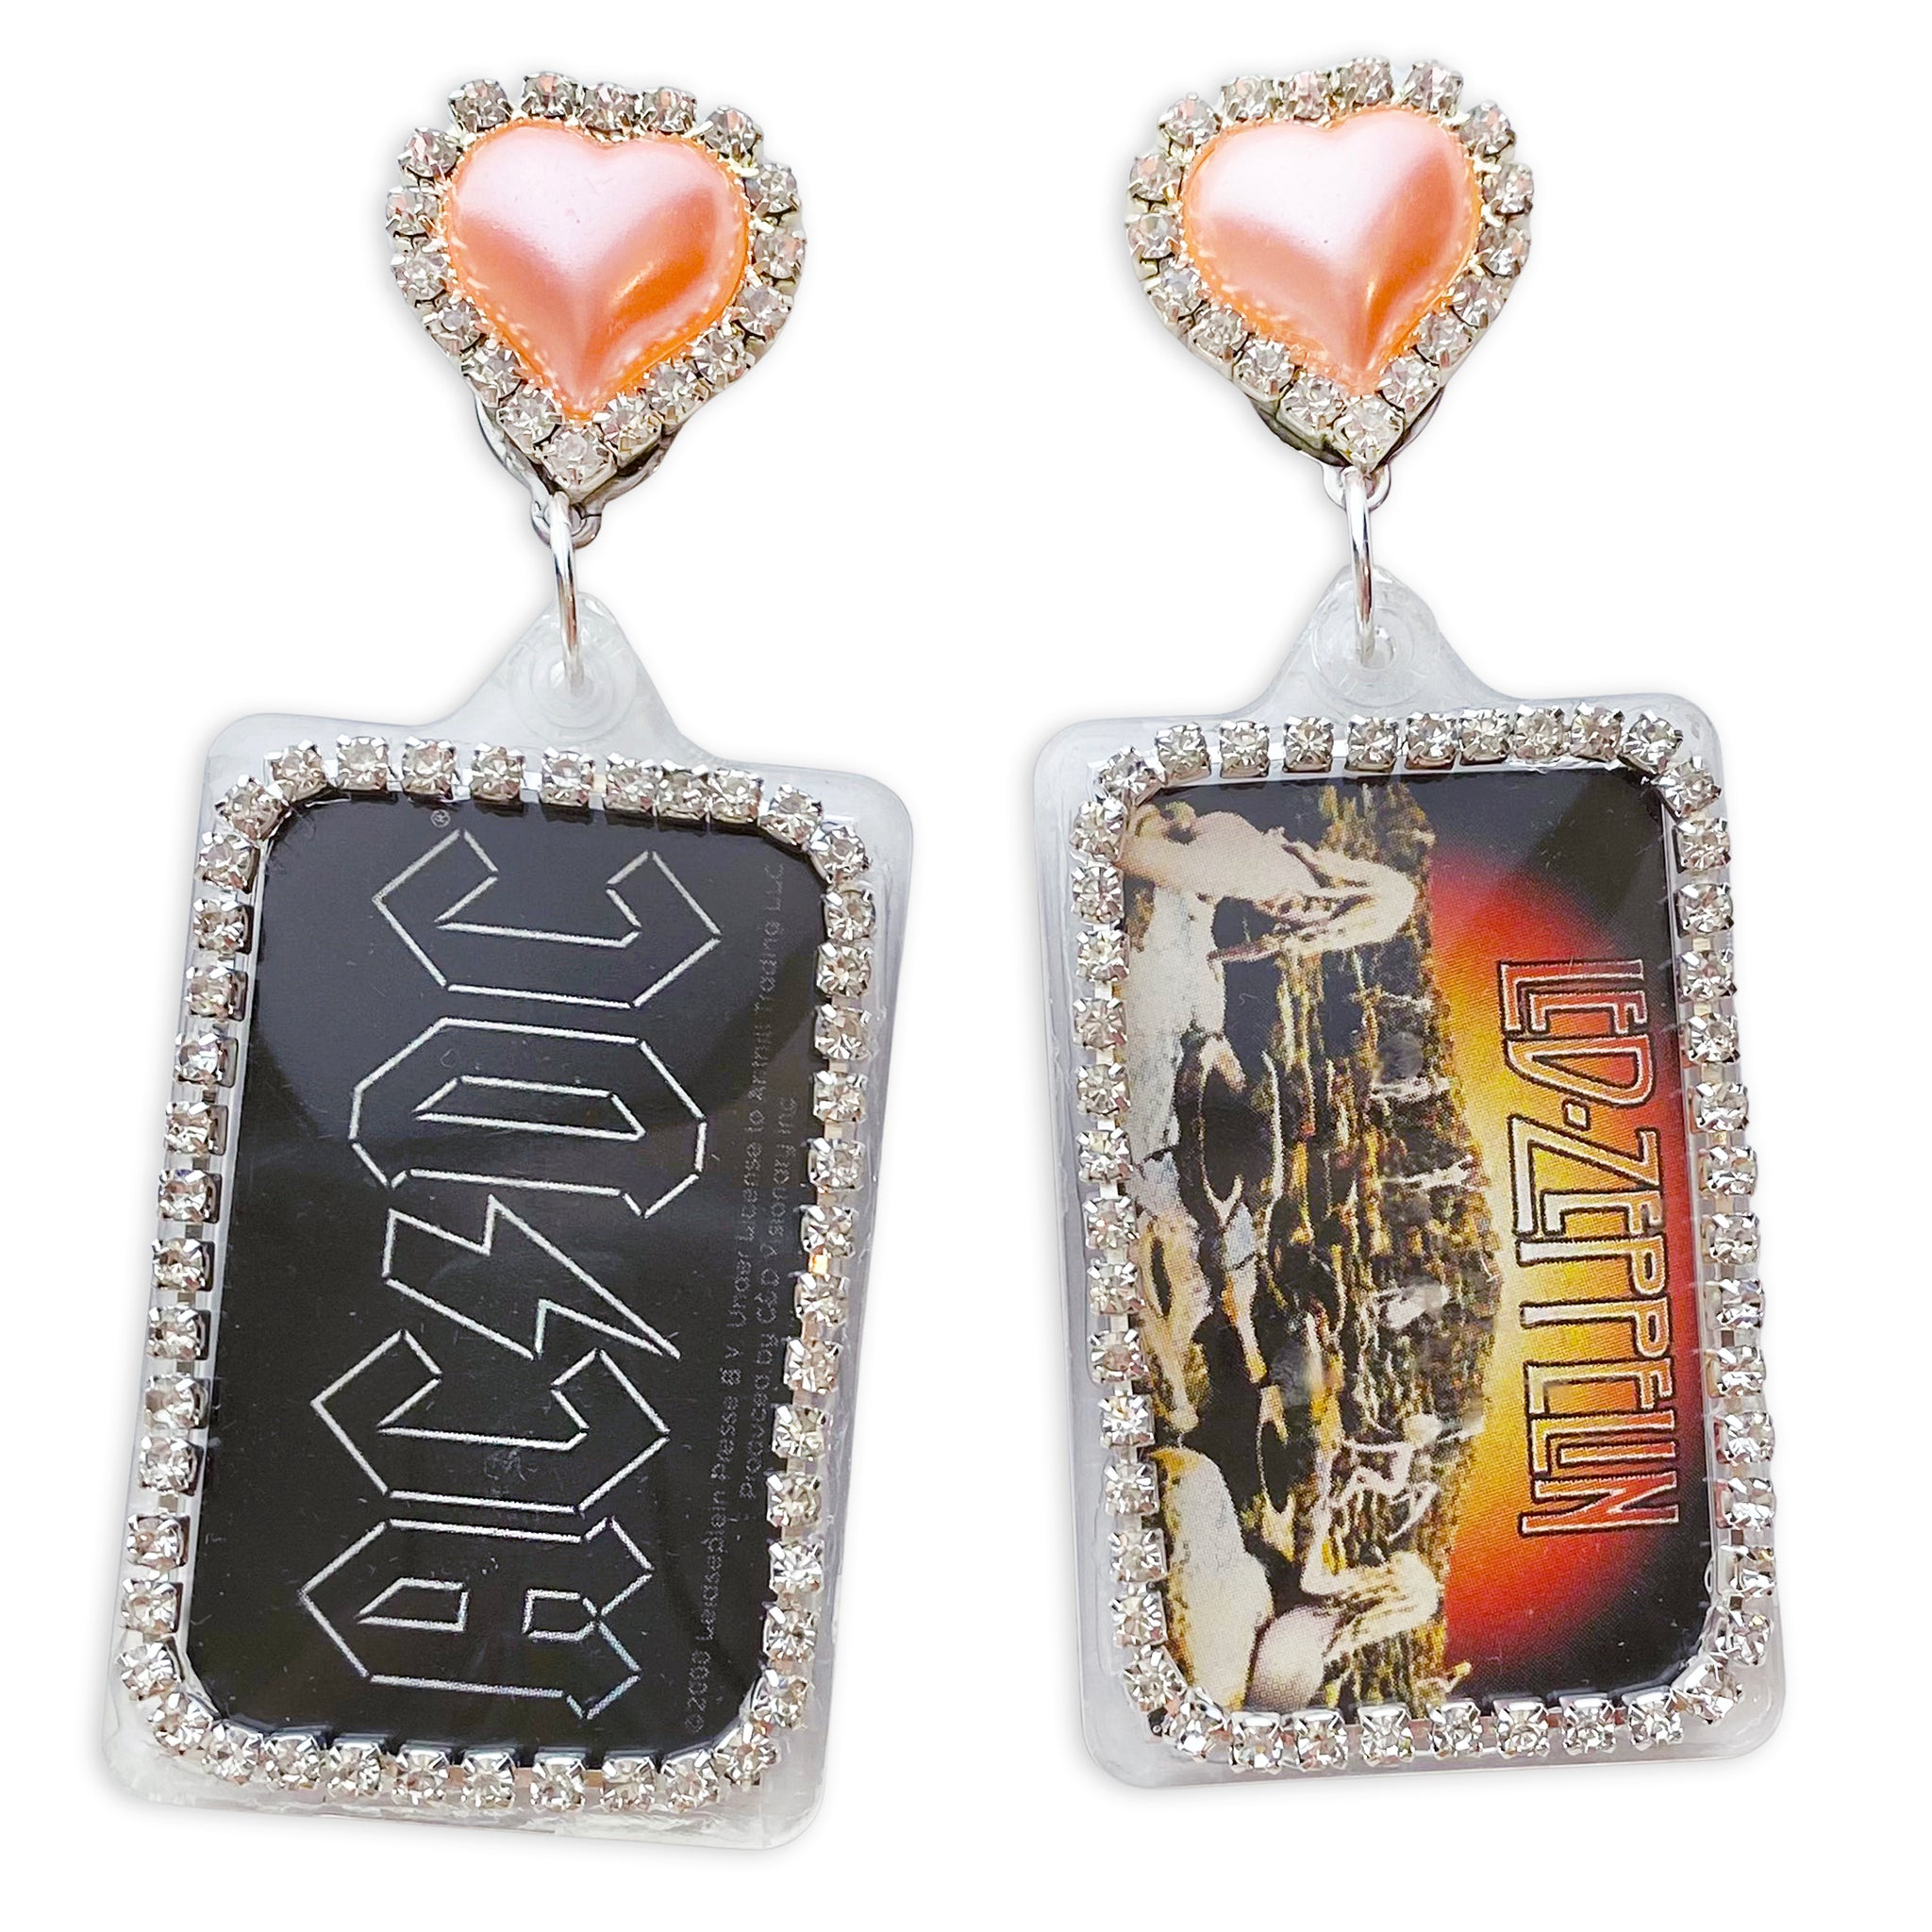 Bedazzled ACDC/Led Zeppelin Vintage Remix Earrings